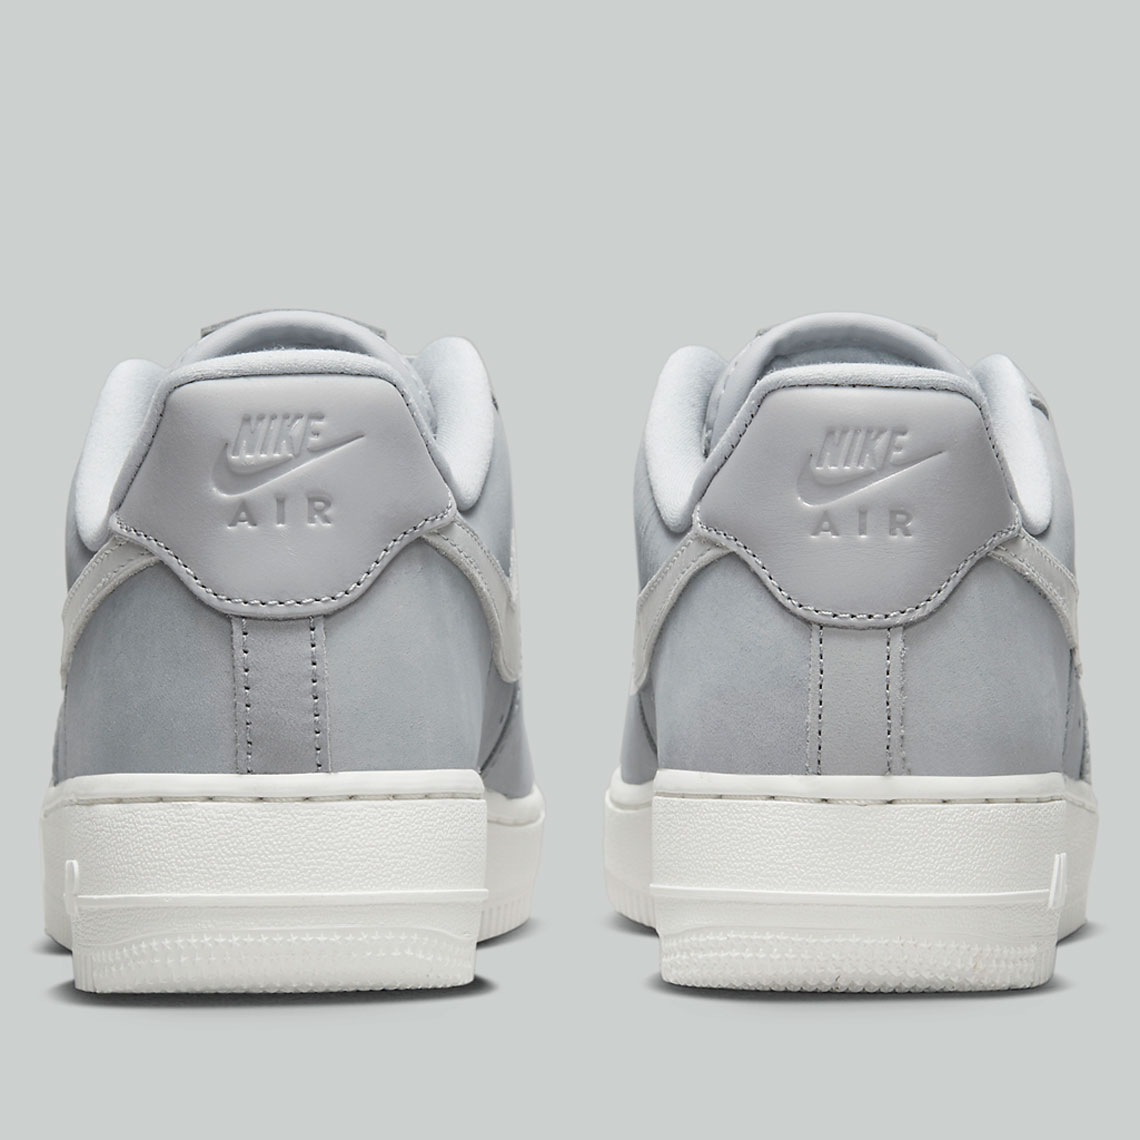 Nike Air Force 1 Low Wolf Grey Summit White Dr9503 001 2